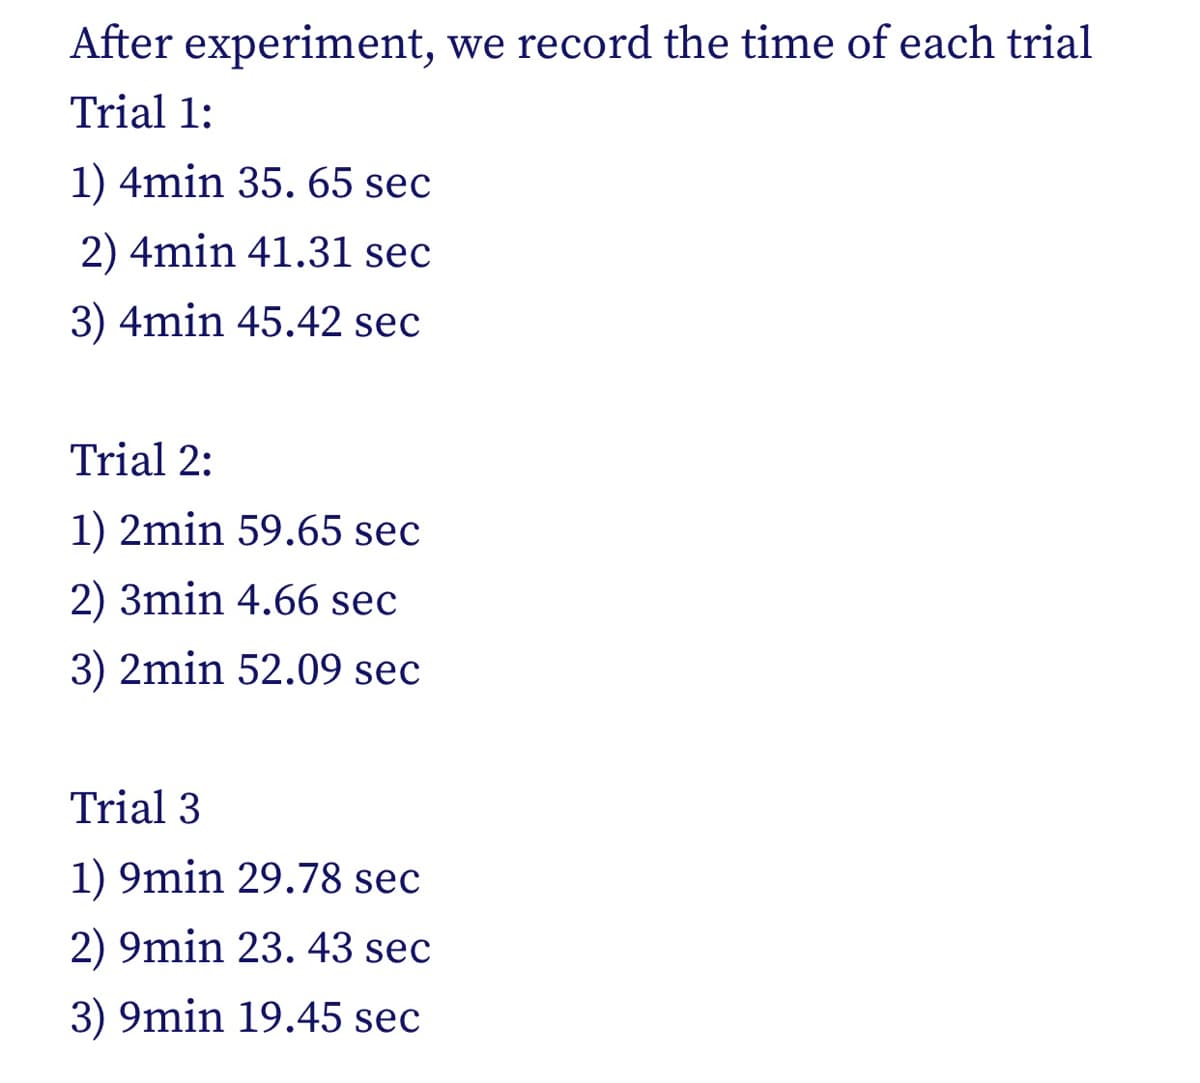 After experiment, we record the time of each trial
Trial 1:
1) 4min 35. 65 sec
2) 4min 41.31 sec
3) 4min 45.42 sec
Trial 2:
1) 2min 59.65 sec
2) 3min 4.66 sec
3) 2min 52.09 sec
Trial 3
1) 9min 29.78 sec
2) 9min 23. 43 sec
3) 9min 19.45 sec
